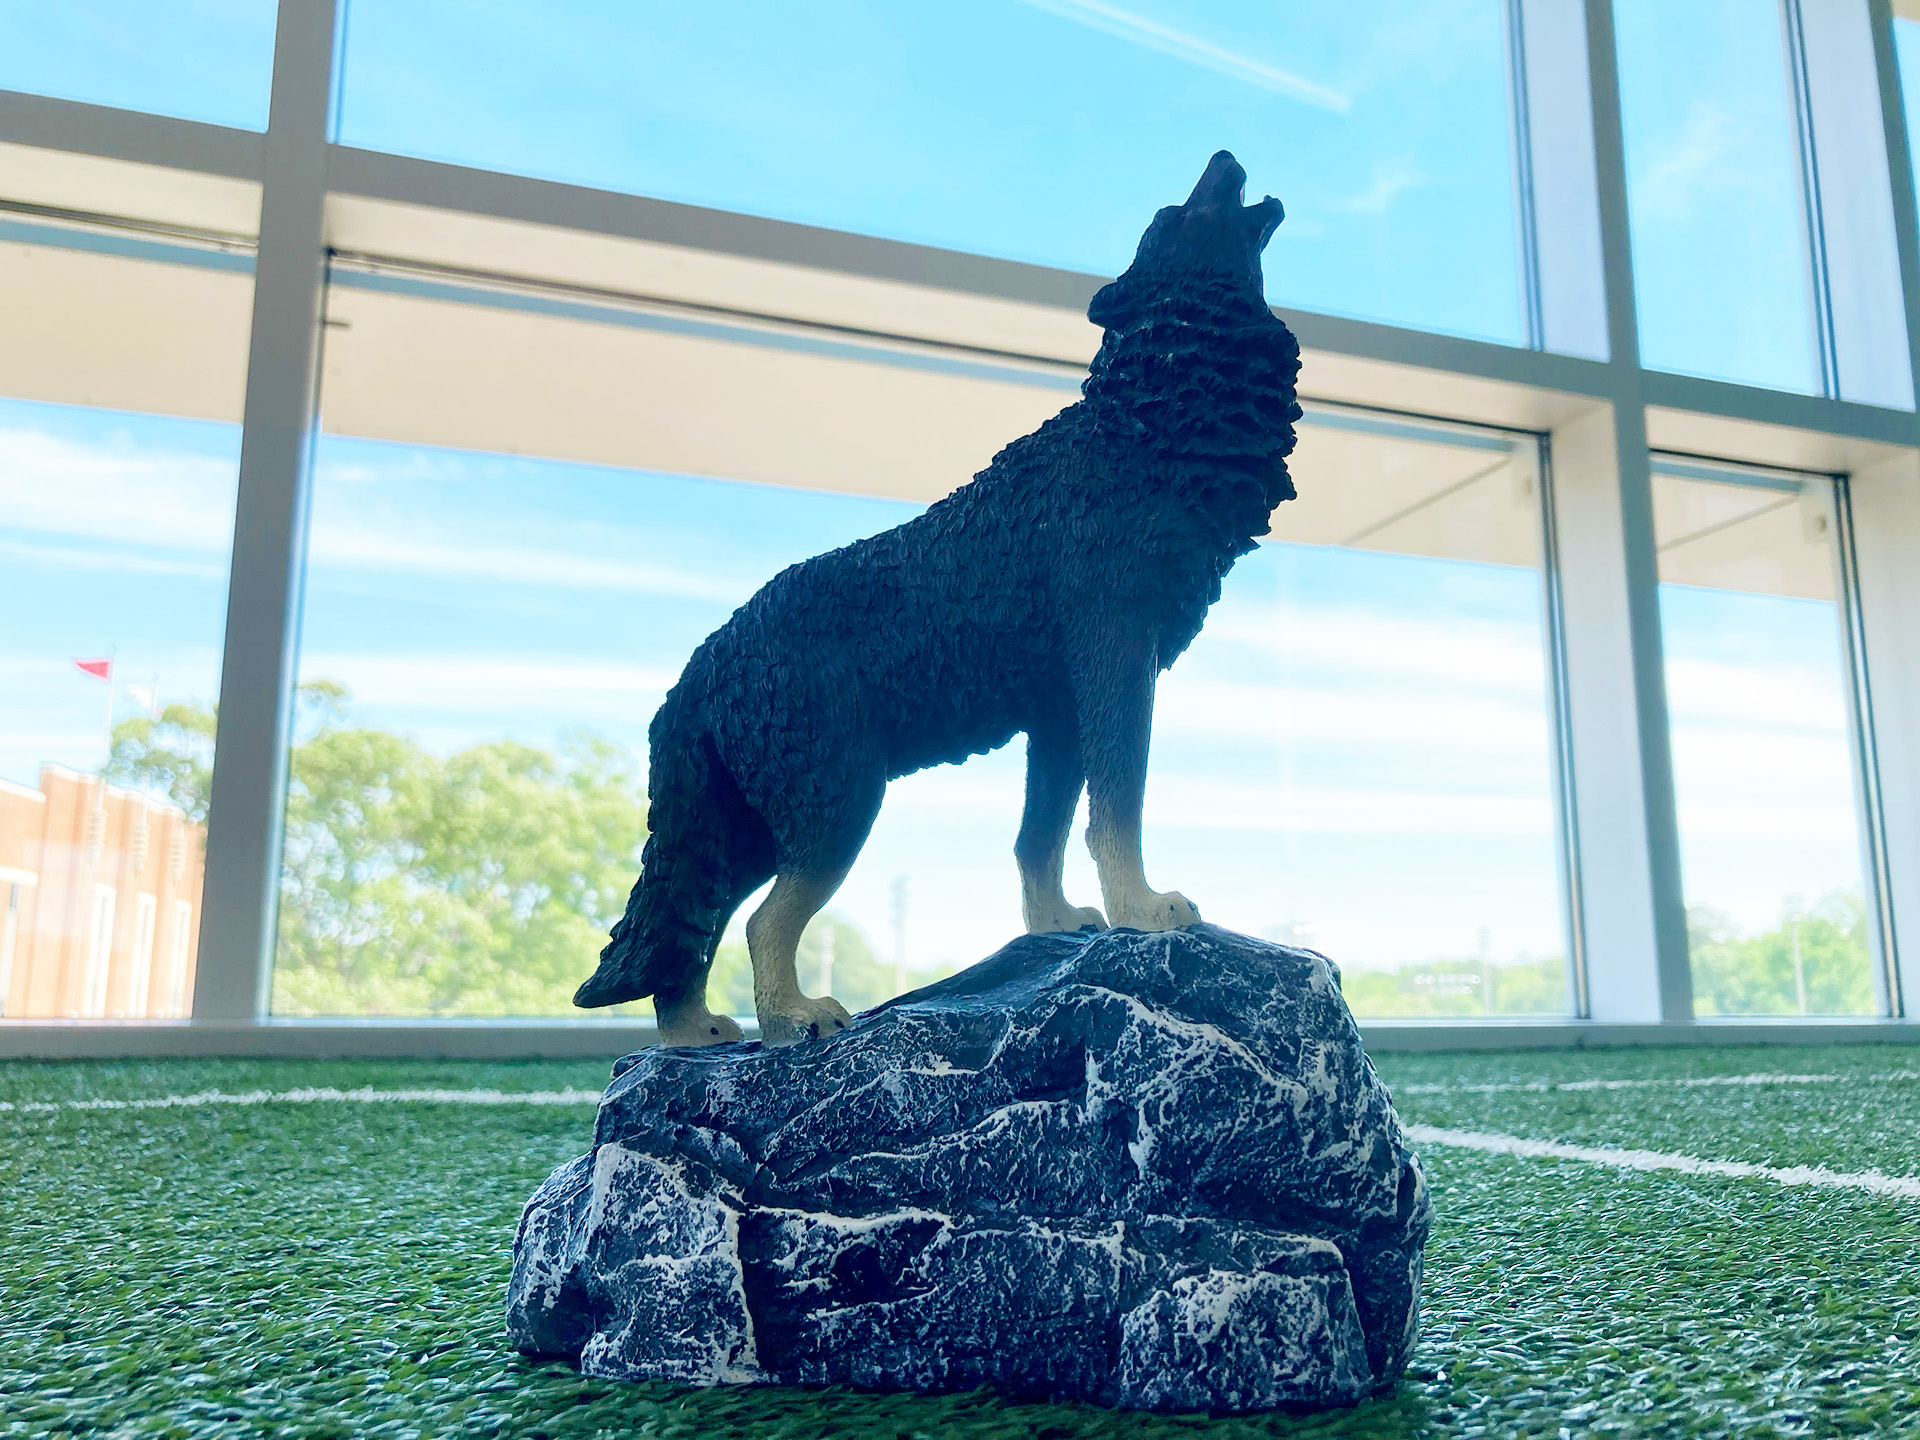 A Wolfie trophy sitting on turf in the Wellness and Recreation Center